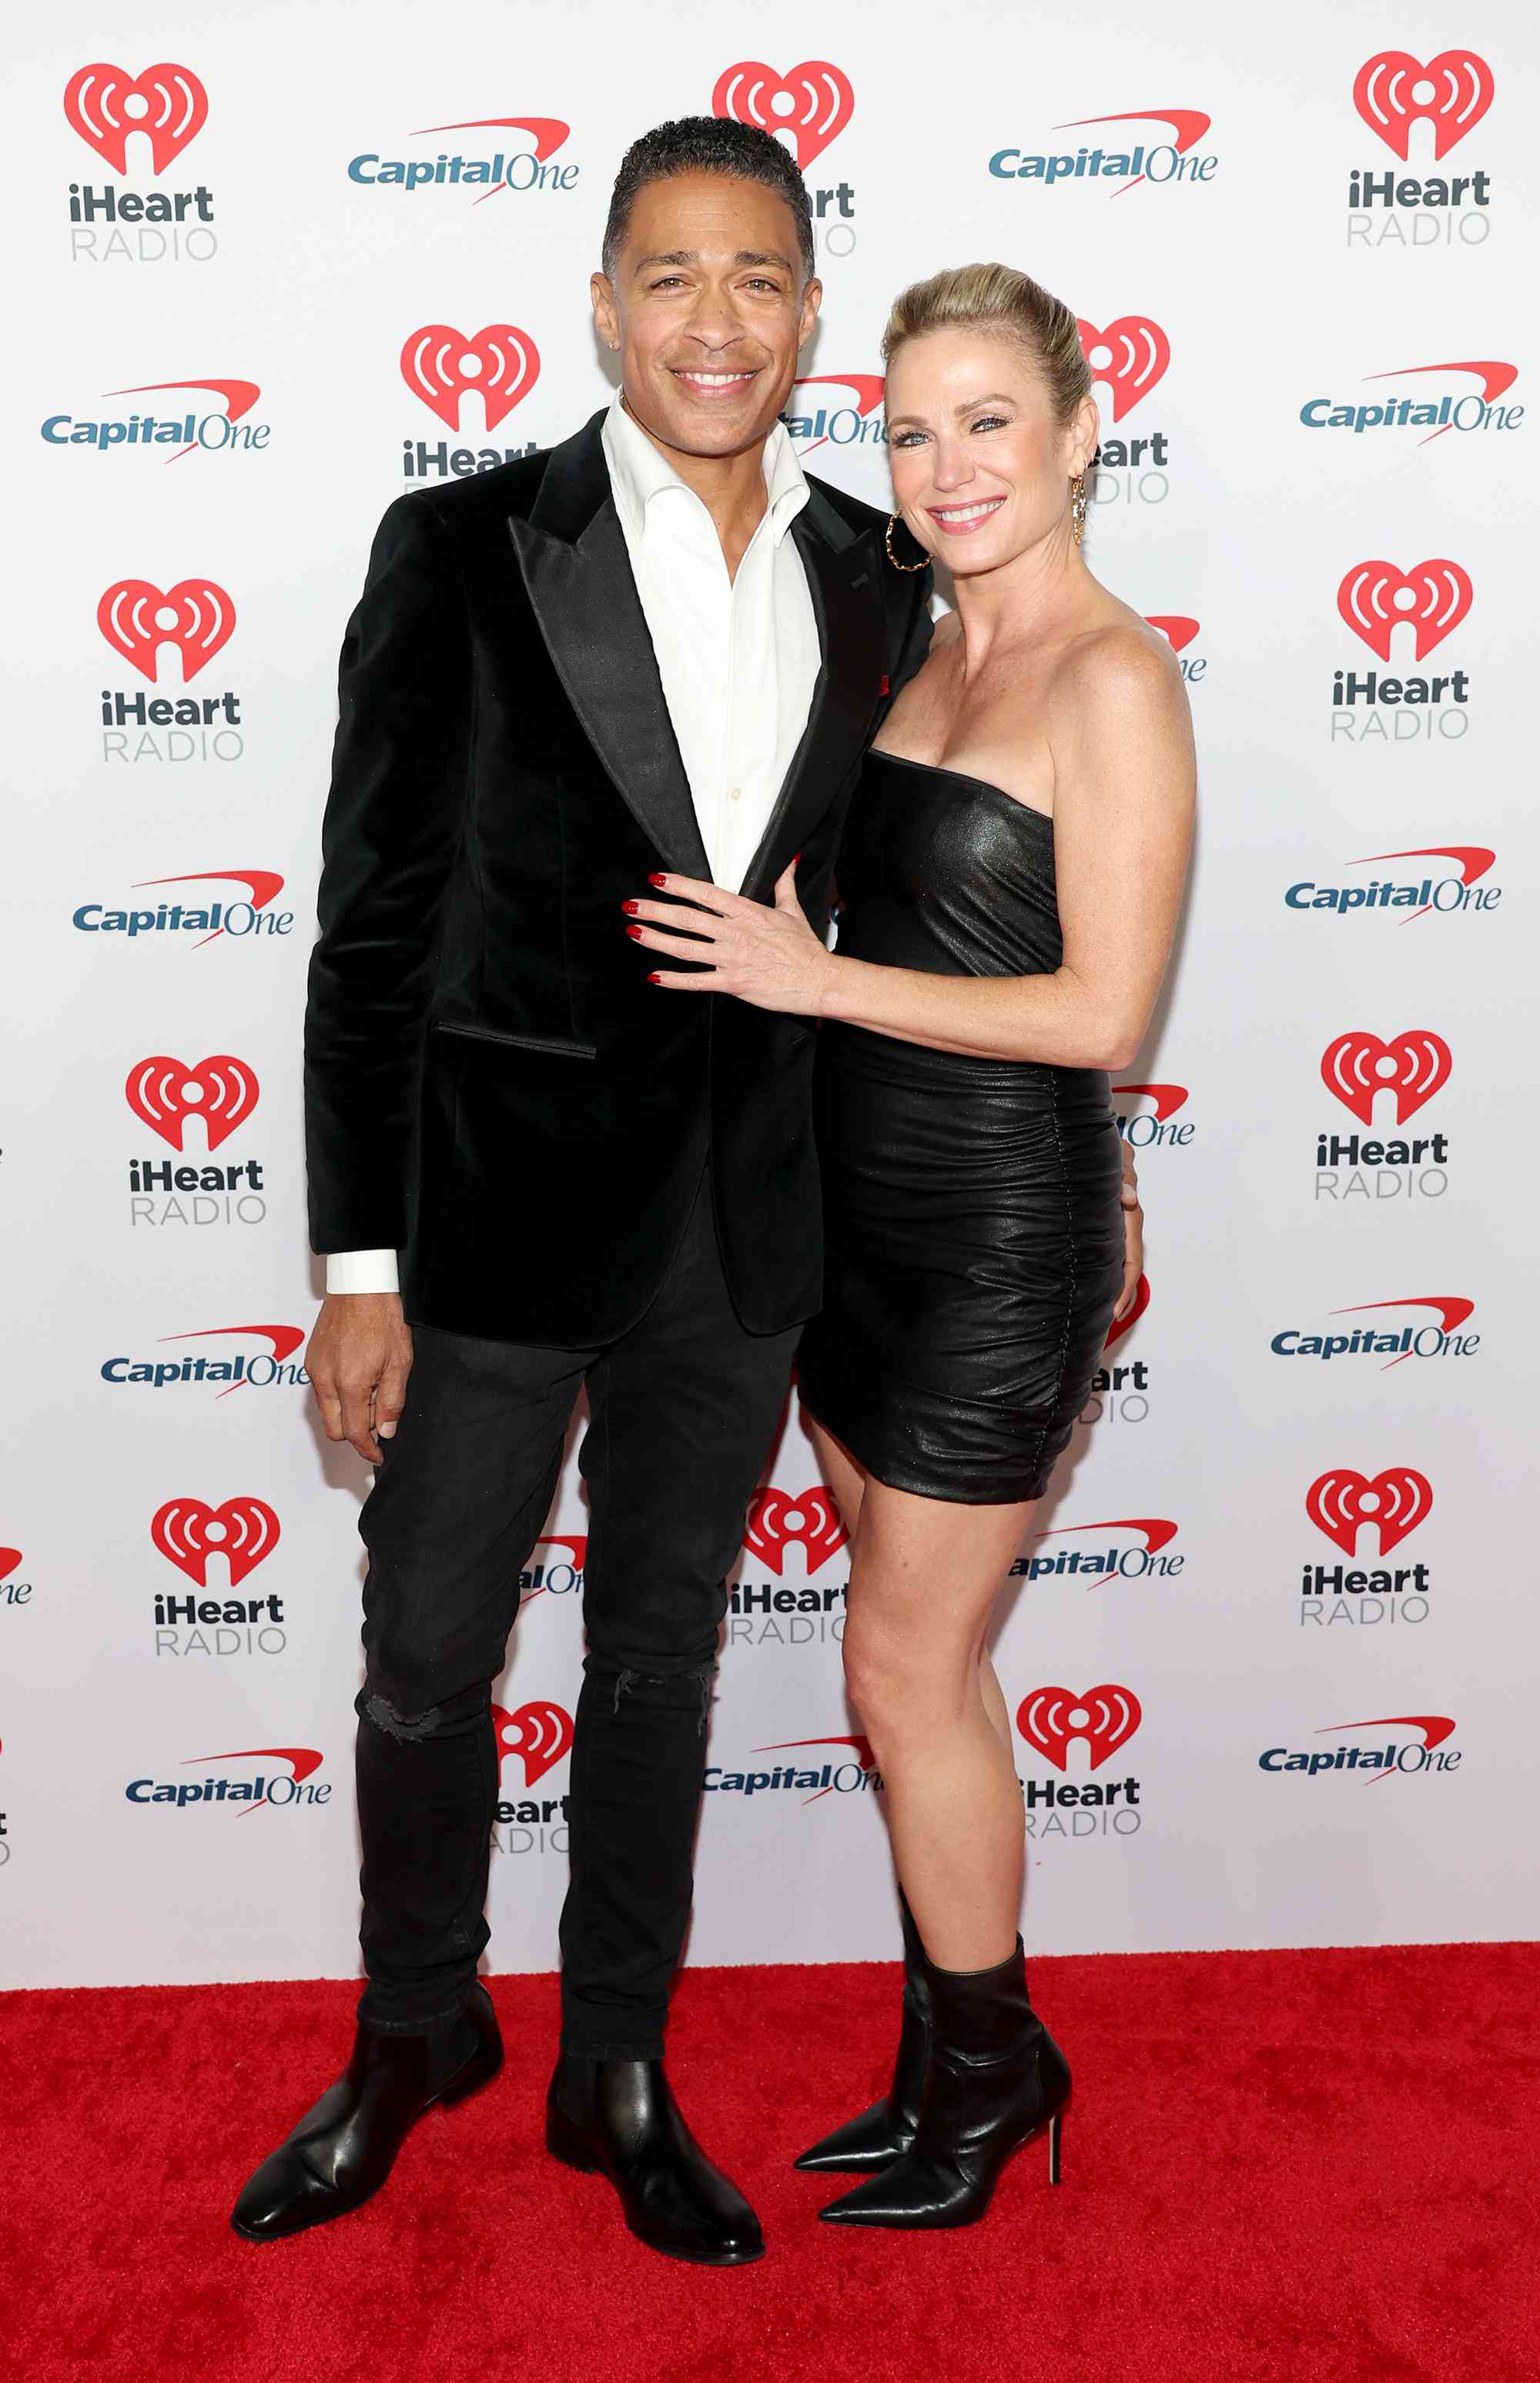 T.J. Holmes and Amy Robach attend iHeartRadio 102.7 KIIS FM's Jingle Ball 2023 Presented by Capital One at The Kia Forum on December 01, 2023 in Los Angeles, California.